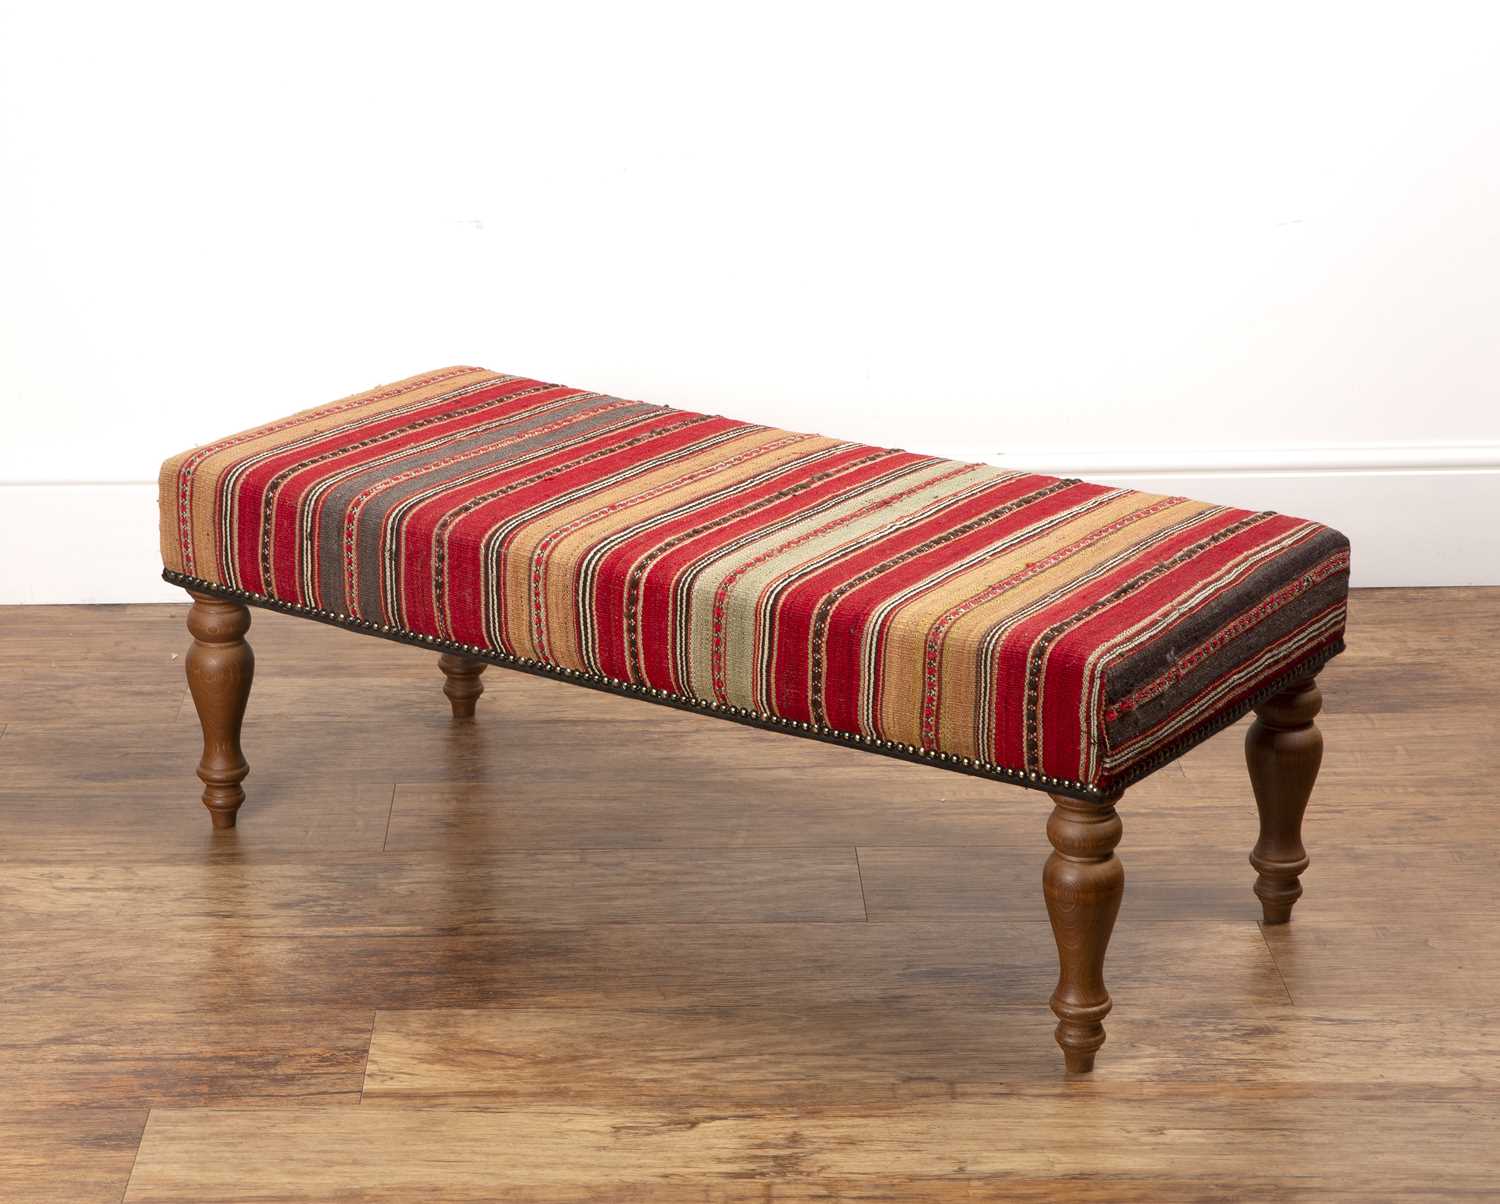 Contemporary footstool with a Kelim type cover, 102cm long x 46cm deep x 38cm high Provenance: The - Image 3 of 5